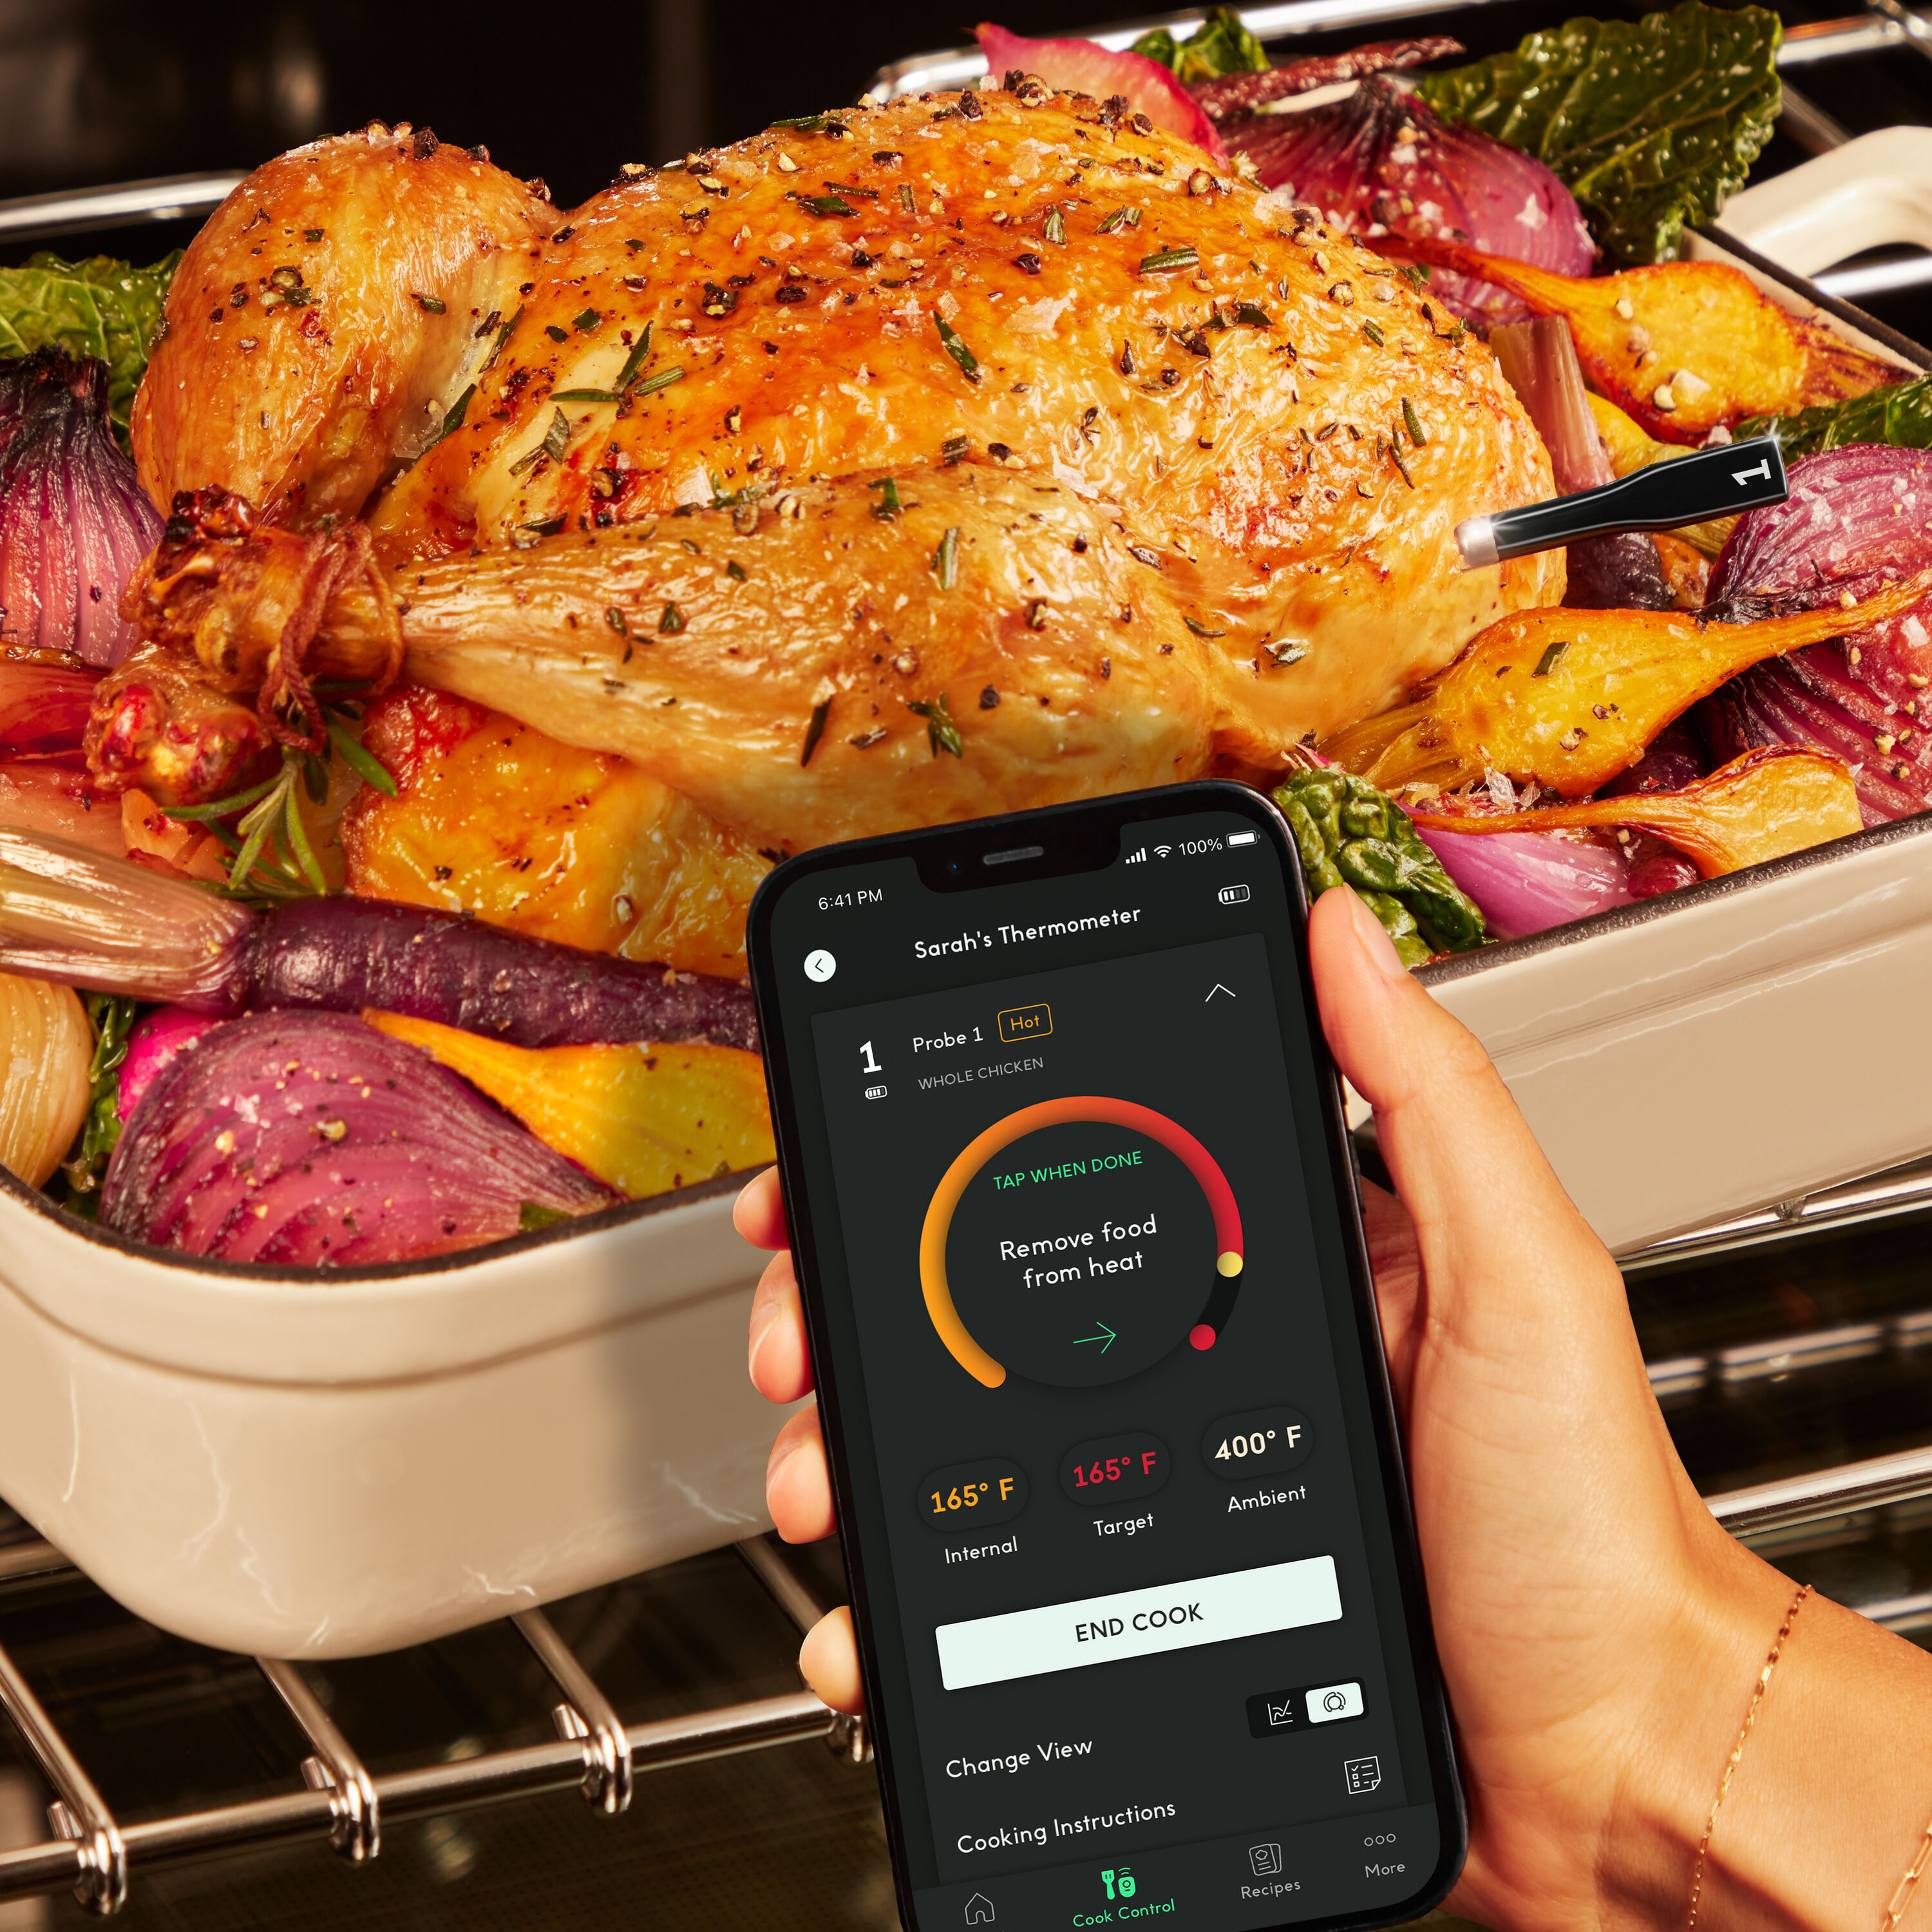 Chef IQ Smart Thermometer – The Curated Kitchen & Home Store